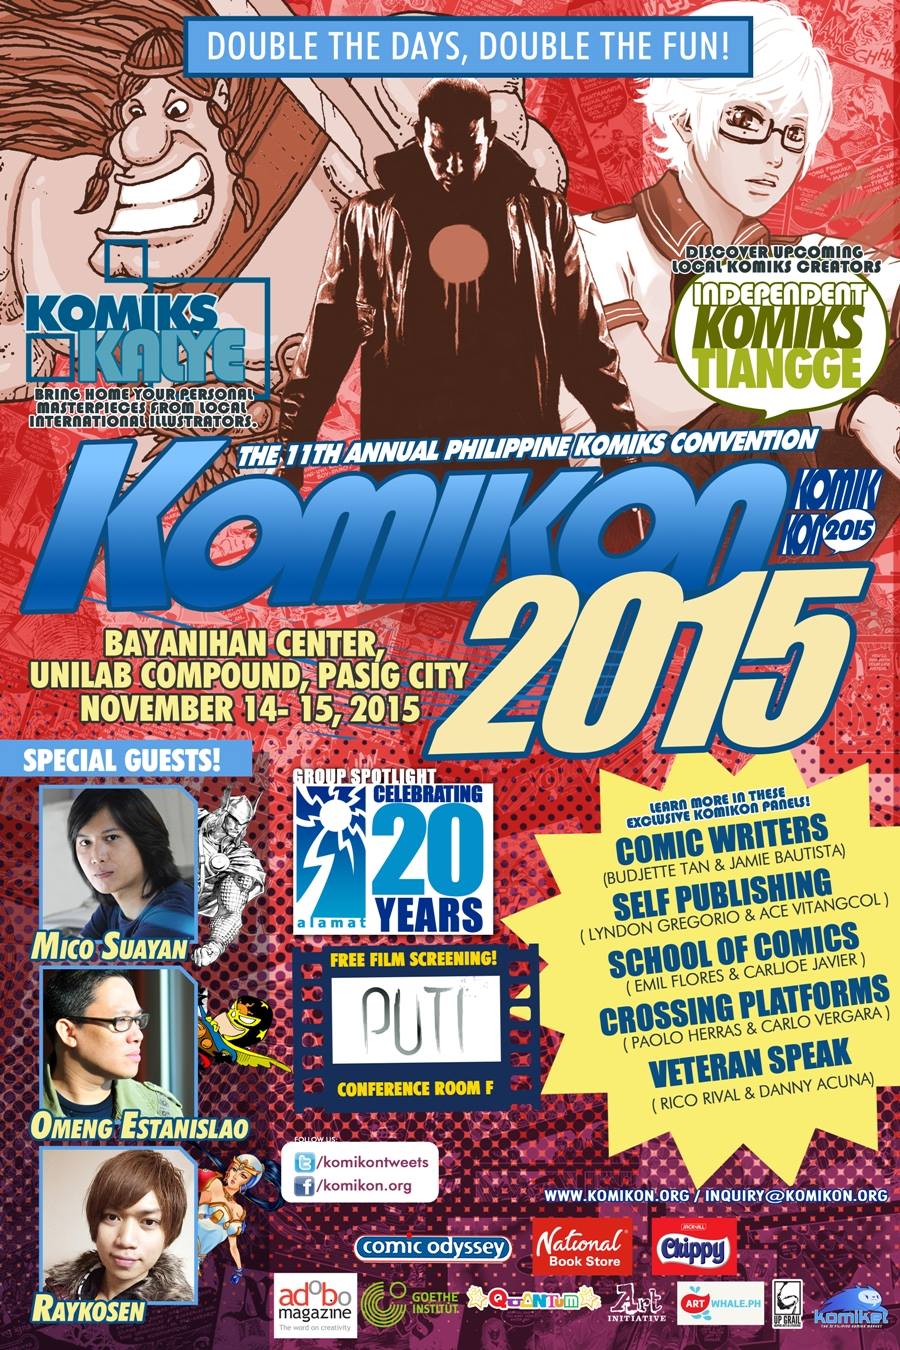 Komikon 2015 (Official Event Page) November 14 - November 15 Nov 14 at 10:00am to Nov 15 at 7:00pm Show Map Bayanihan Center - Unilab Pioneer Avenue, 1501 Pasig, Philippines Find Tickets Tickets Available www.komikon.org Komikon 2015 November 14-15, 2015 Bayanihan Center Unilab Compound, Pasig City Save the date! For Exhibitor/Sponsor Registration - https://goo.gl/gLTYTA For Indie Tiangge Registration - https://goo.gl/nD66Th For Attendees, 2-Day Ticket Registration - https://goo.gl/aVEy1m For Media Registration - https://goo.gl/gjgt87 Regular Ticket Price: Php 100 / day Contests: The Last Draw by Gunship Revolution - www.gunshiprevolution.com/thelastdraw More details to be posted soon. ----- Get ready for the biggest Komikon event ever with two-days of komiks fun and lots of freebies! Whatever you want, we have it. Make sure to bring lots of cash! #komikon2015